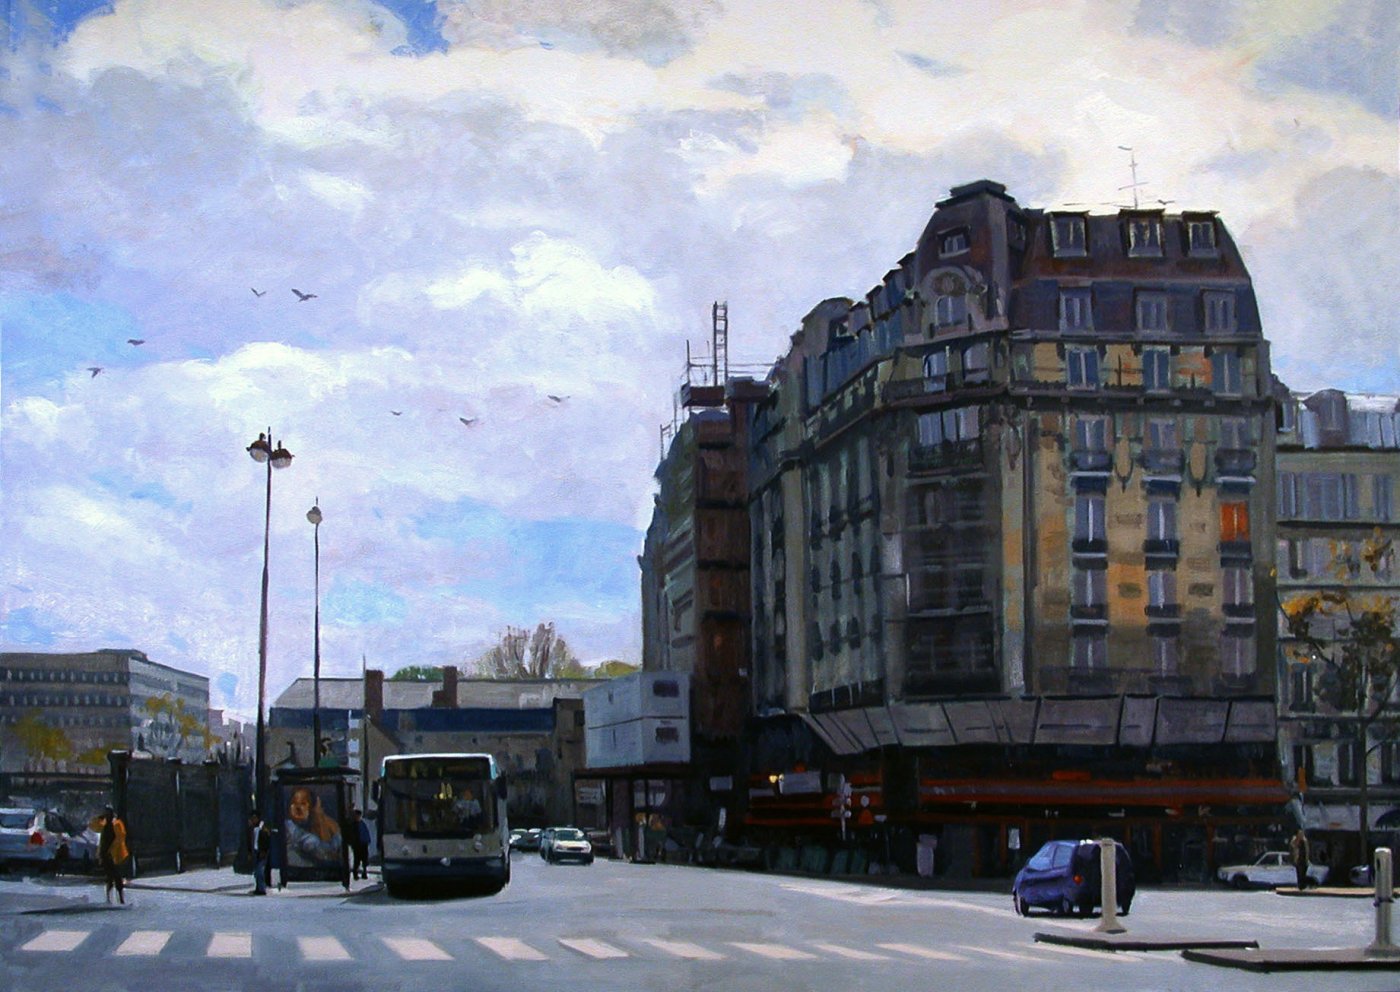 Near the Gare D'Lest, oil on canvas, 52 X 72 inches, copyright ©2004